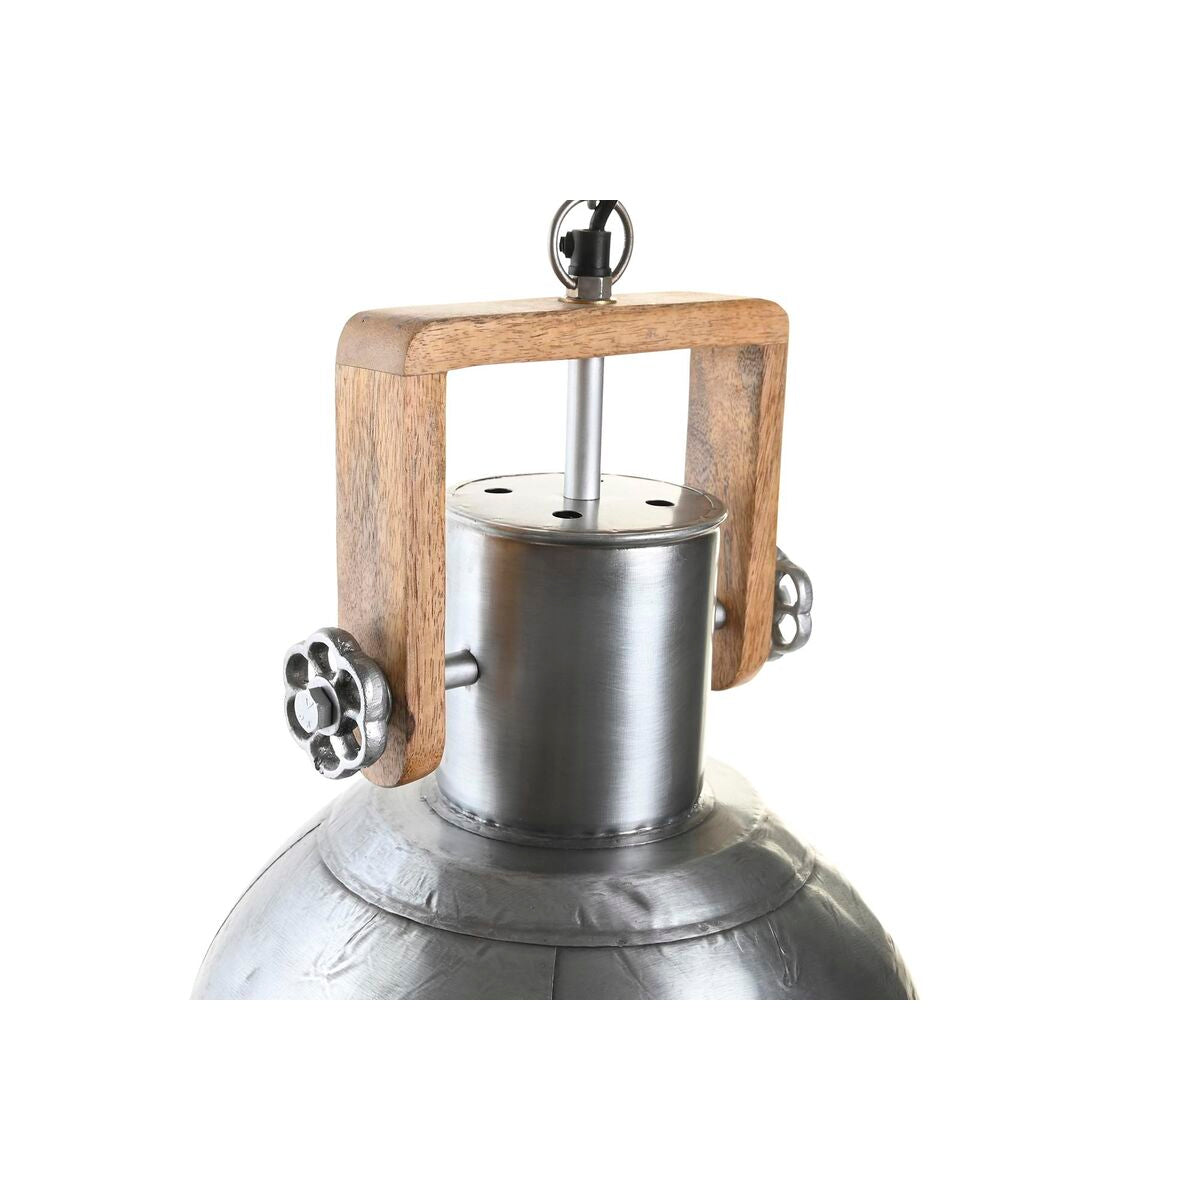 Ceiling Lamp DKD Home Decor Silver Brown Silver 50 W (31 x 31 x 44 cm)